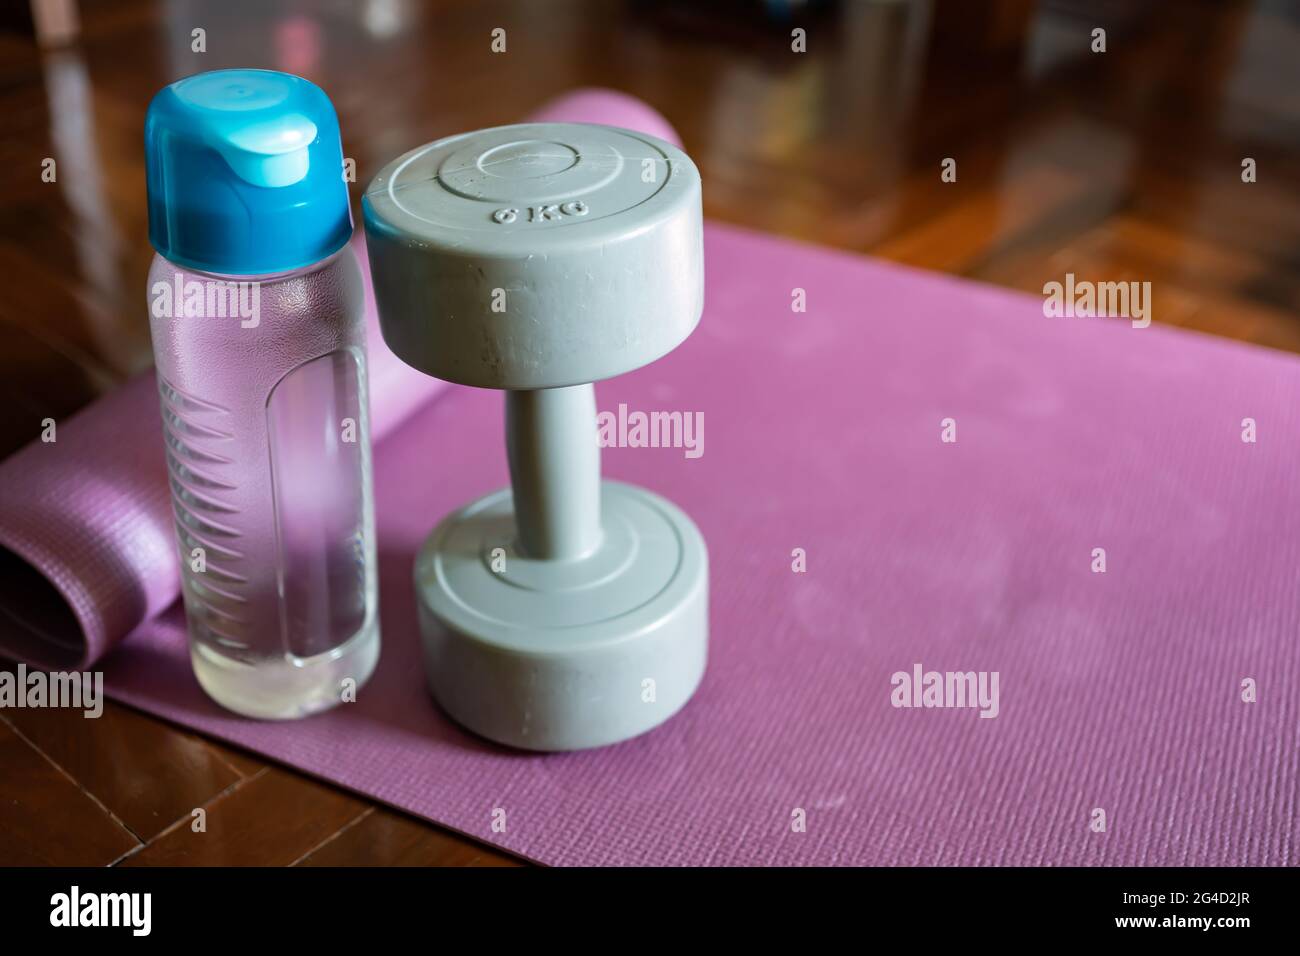 Dumbbell and water bottle on yoga mat Stock Photo